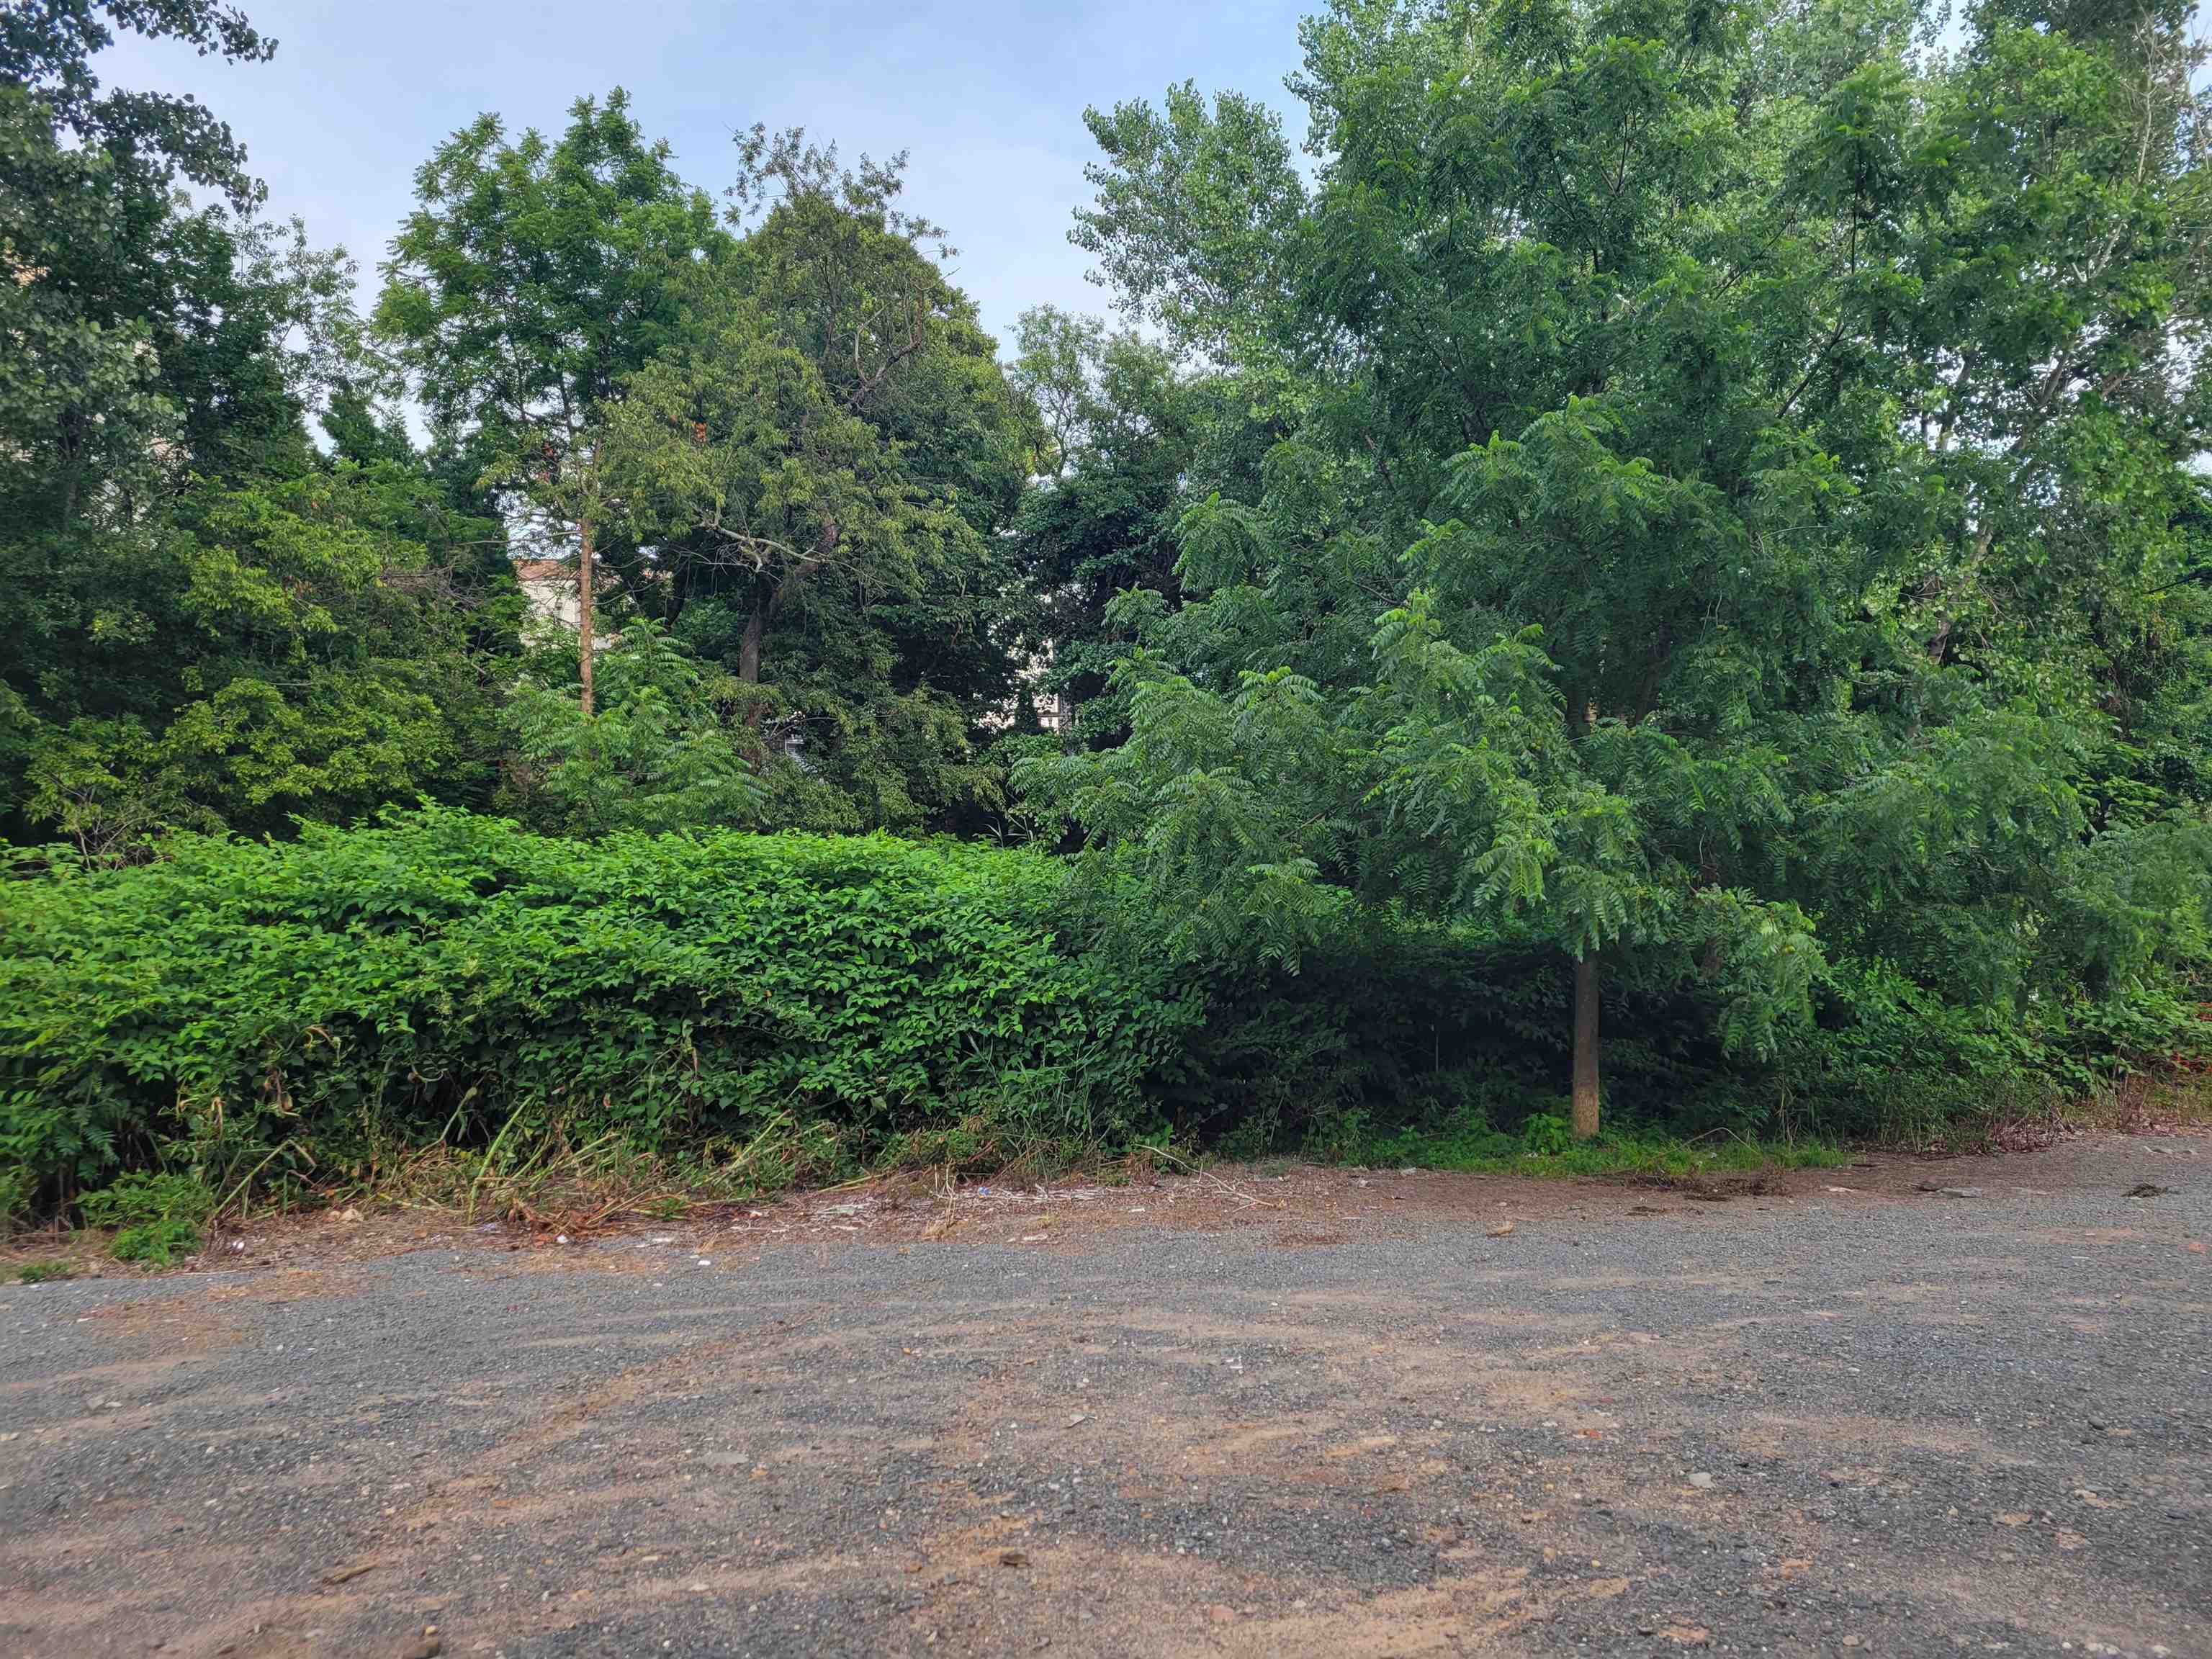 *Following lots in Block5403 must be sold together re: on Elm & Floyd Streets; Lots 1, 2, 3, 4, 5. and Lots 24, 25, 26 and 27. Floyd and Elm Street Lots are contiguous. Developers/Investors! Rare opportunity=9 vacant  lots in The Heights section appr.1 mile to Journal Square Path. Must be sold together.  Currently zoned in 1-2 residential. Sewer utilities located in both Floyd & Elm Streets. JCMUA water and sewer line maps attached to the mls.  (Topographical Survey uploaded to mls) Total lot size is approximately 26,364 sq.ft. or .605 acre. Completed 963page Environmental Study/Phase 1 (avail upon request) While an excerpt of Phase 1 is uploaded to mls. Bd. of Adj. application anticipated for variance to allow multi-unit building.  Final variance approval is the responsibility of the Buyer. Absolutely, No access to vacant lots permitted from either Liberty or Floyd Avenues. Absolutely no showings/access to vacant lots from Em Street without confirmed appointment.  Perspective buyers may NOT view vacant lots without written permission and may not enter owners property without an appointment confirmed in writing. Trespassers will be prosecuted.